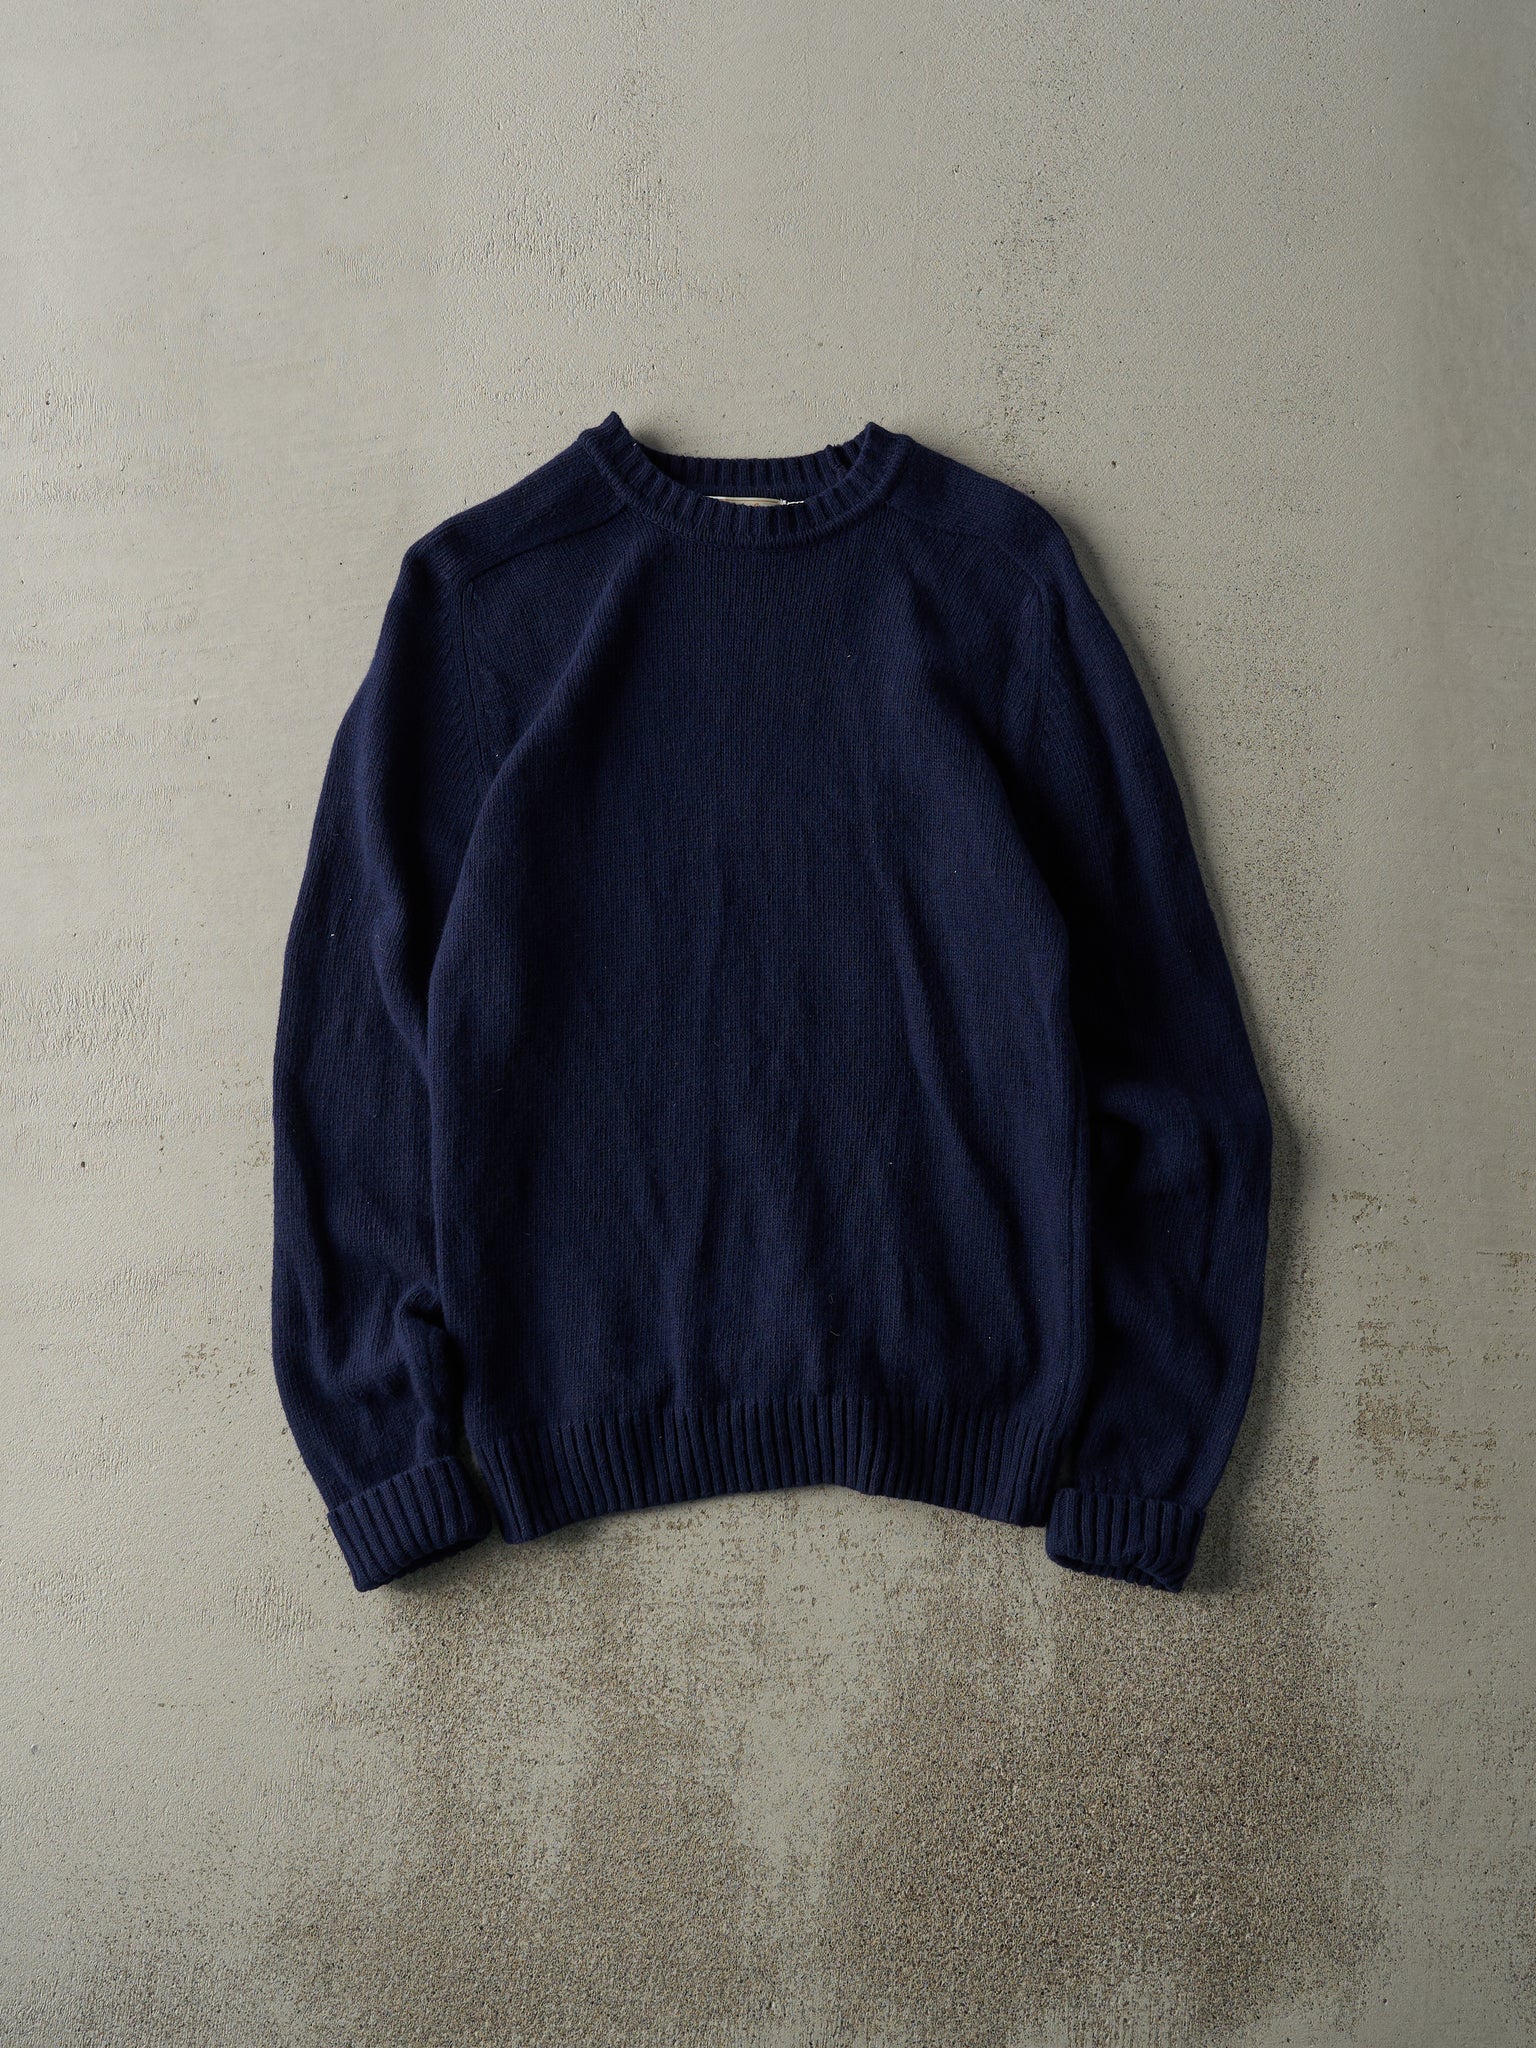 Vintage 70s Navy Blue Wool Knit Pullover (S)